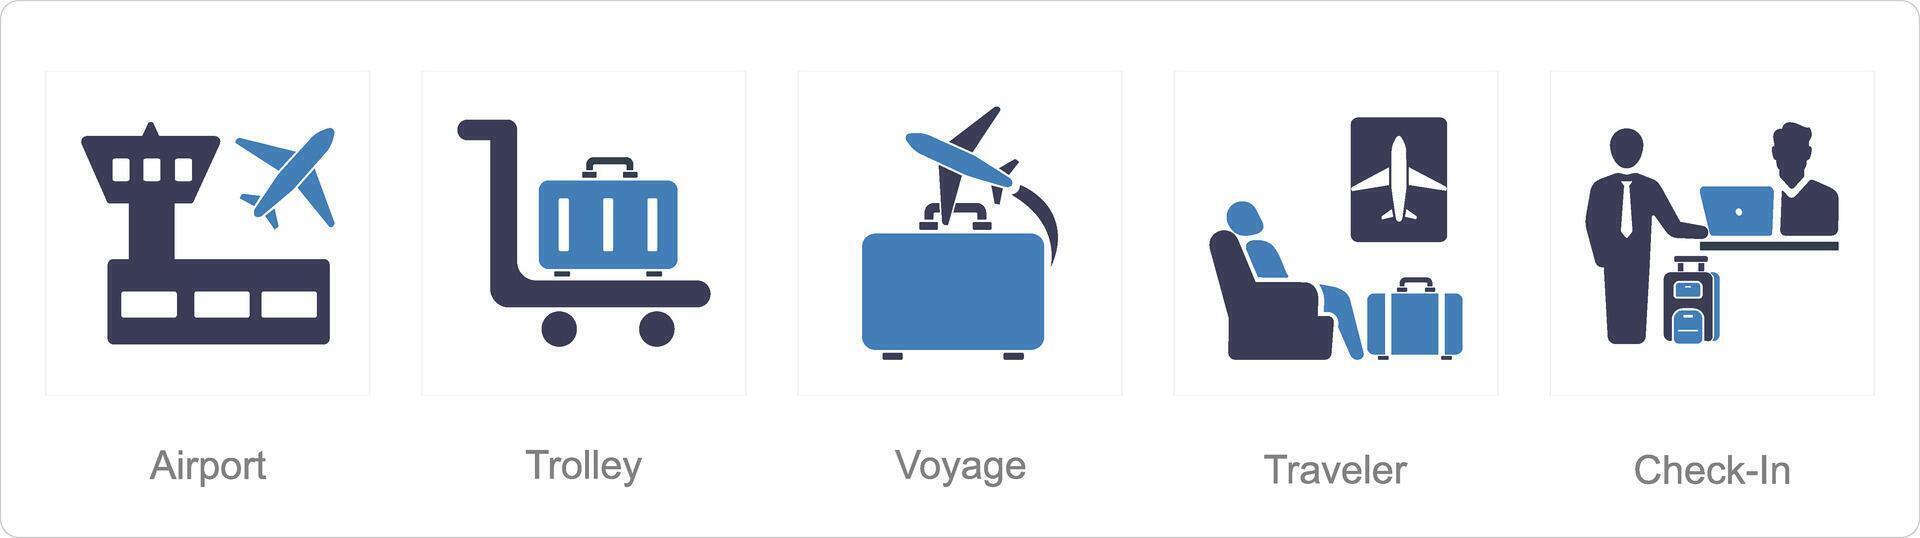 A set of 5 Airport icons as airport, trolley, voyage vector